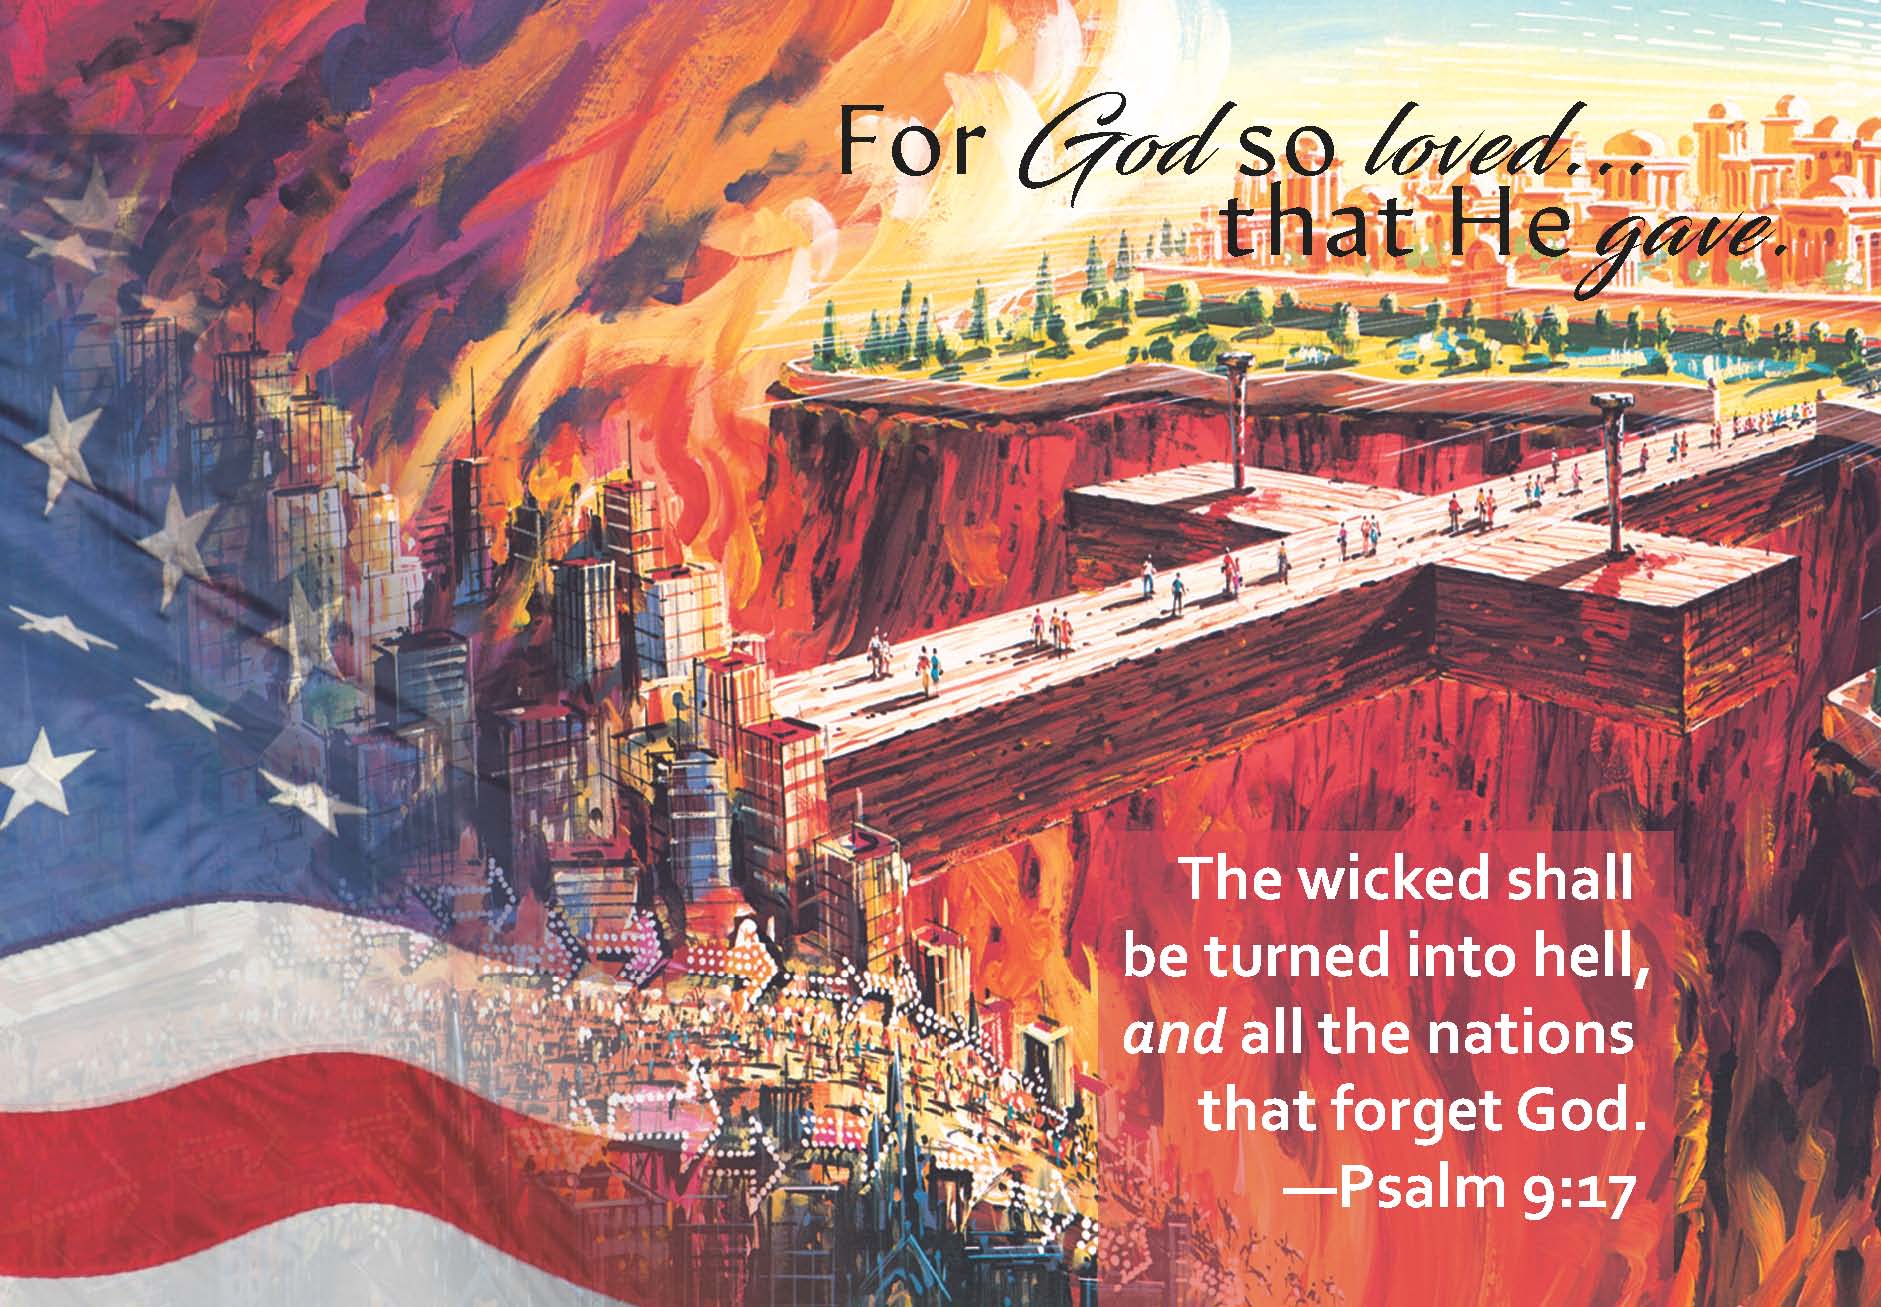 A cross over a burning abyss, with people coming to it, and some choosing to pass over into heaven and the rest falling off into hell. American flag in one corner, and the words "The wicked shall be turned into hell, and all the nations that forget God.—Psalm 9:17"